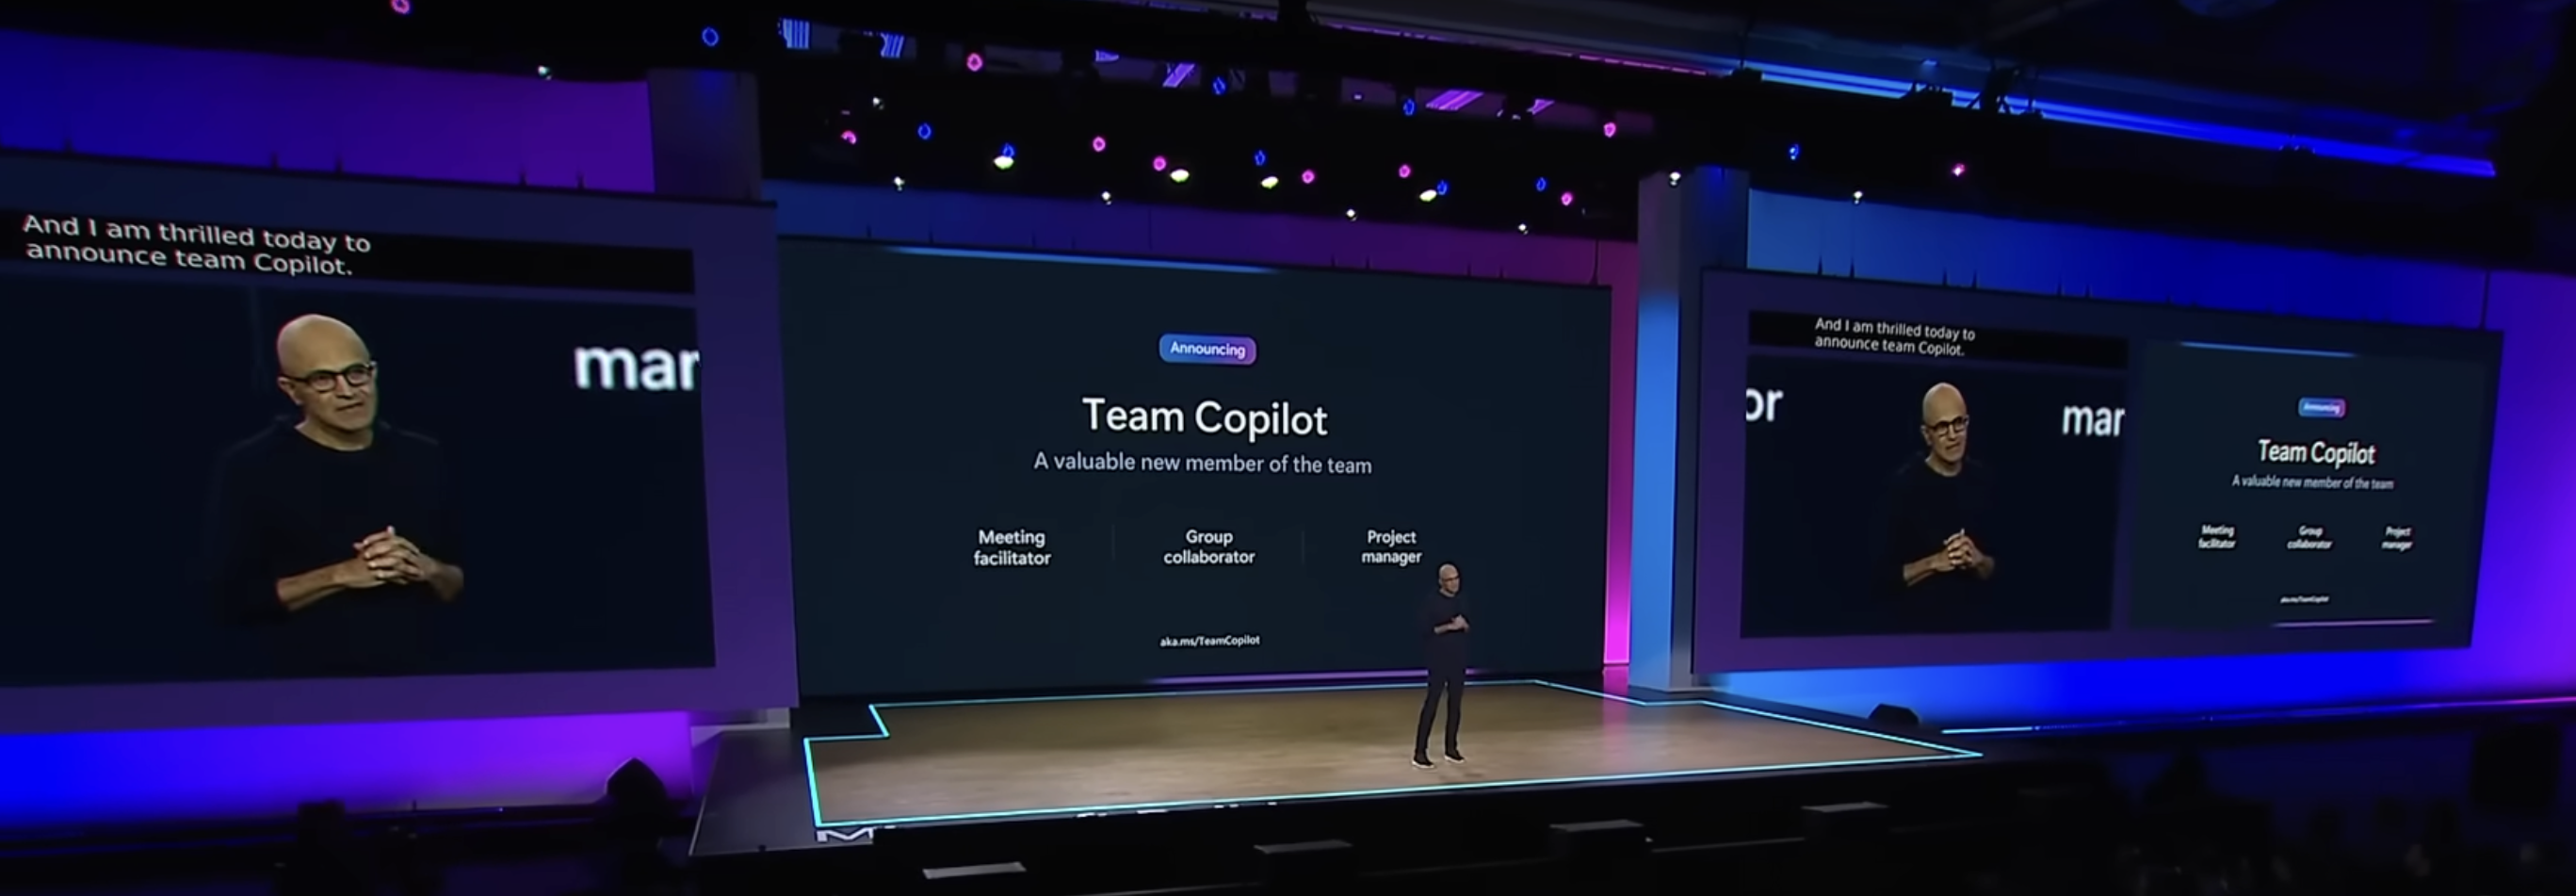 Anyone following the enterprise AI space cannot help but notice the recent shift in marketing AI tools from targeting individuals (code assistants, GP